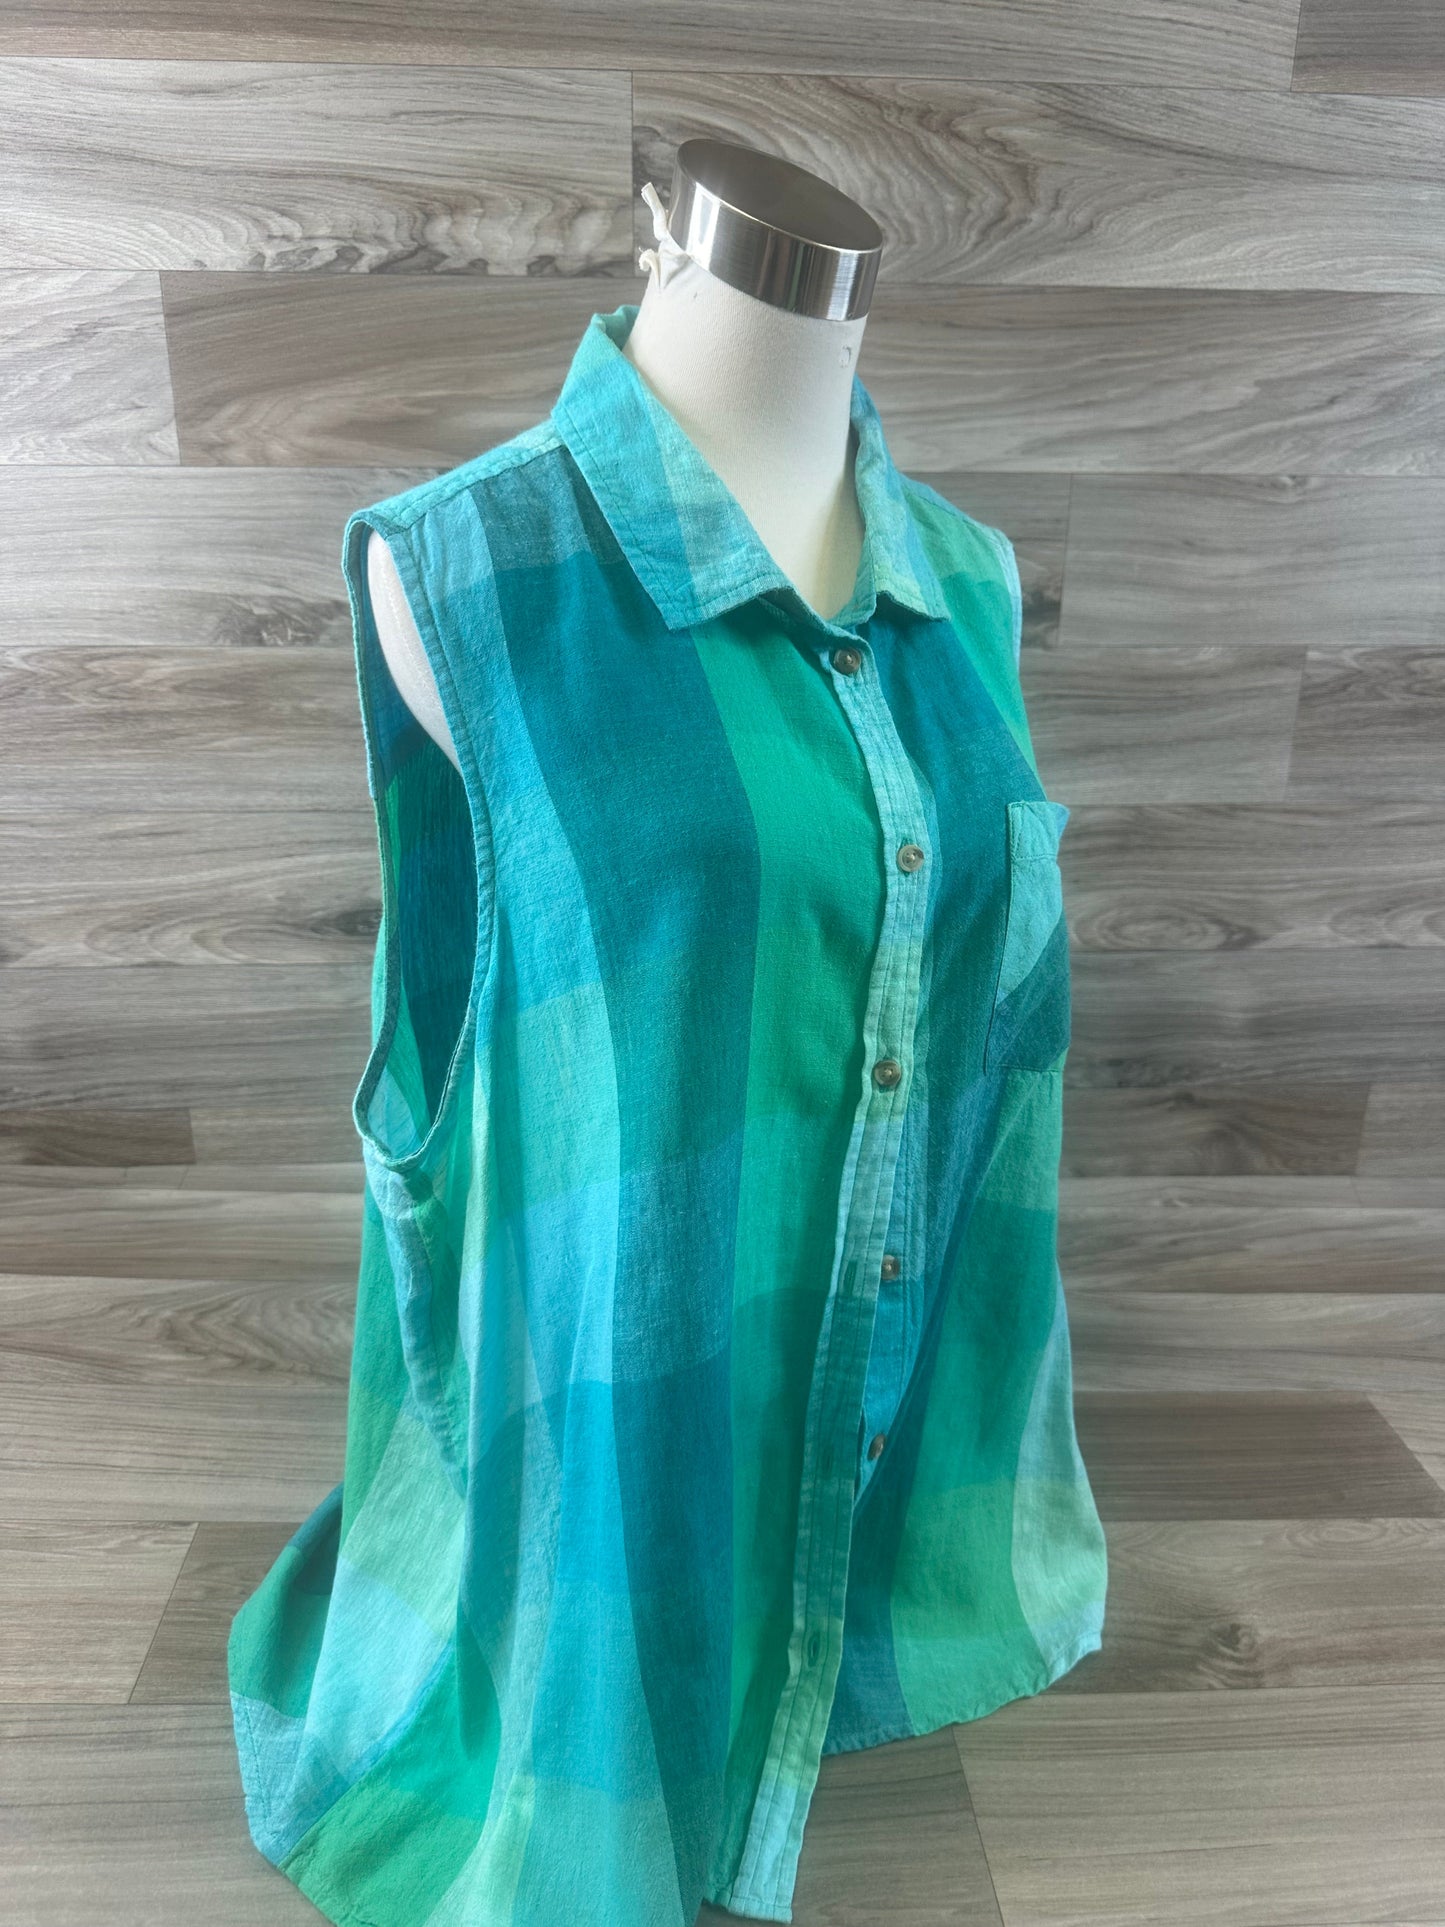 Blue & Green Top Sleeveless Time And Tru, Size Xl